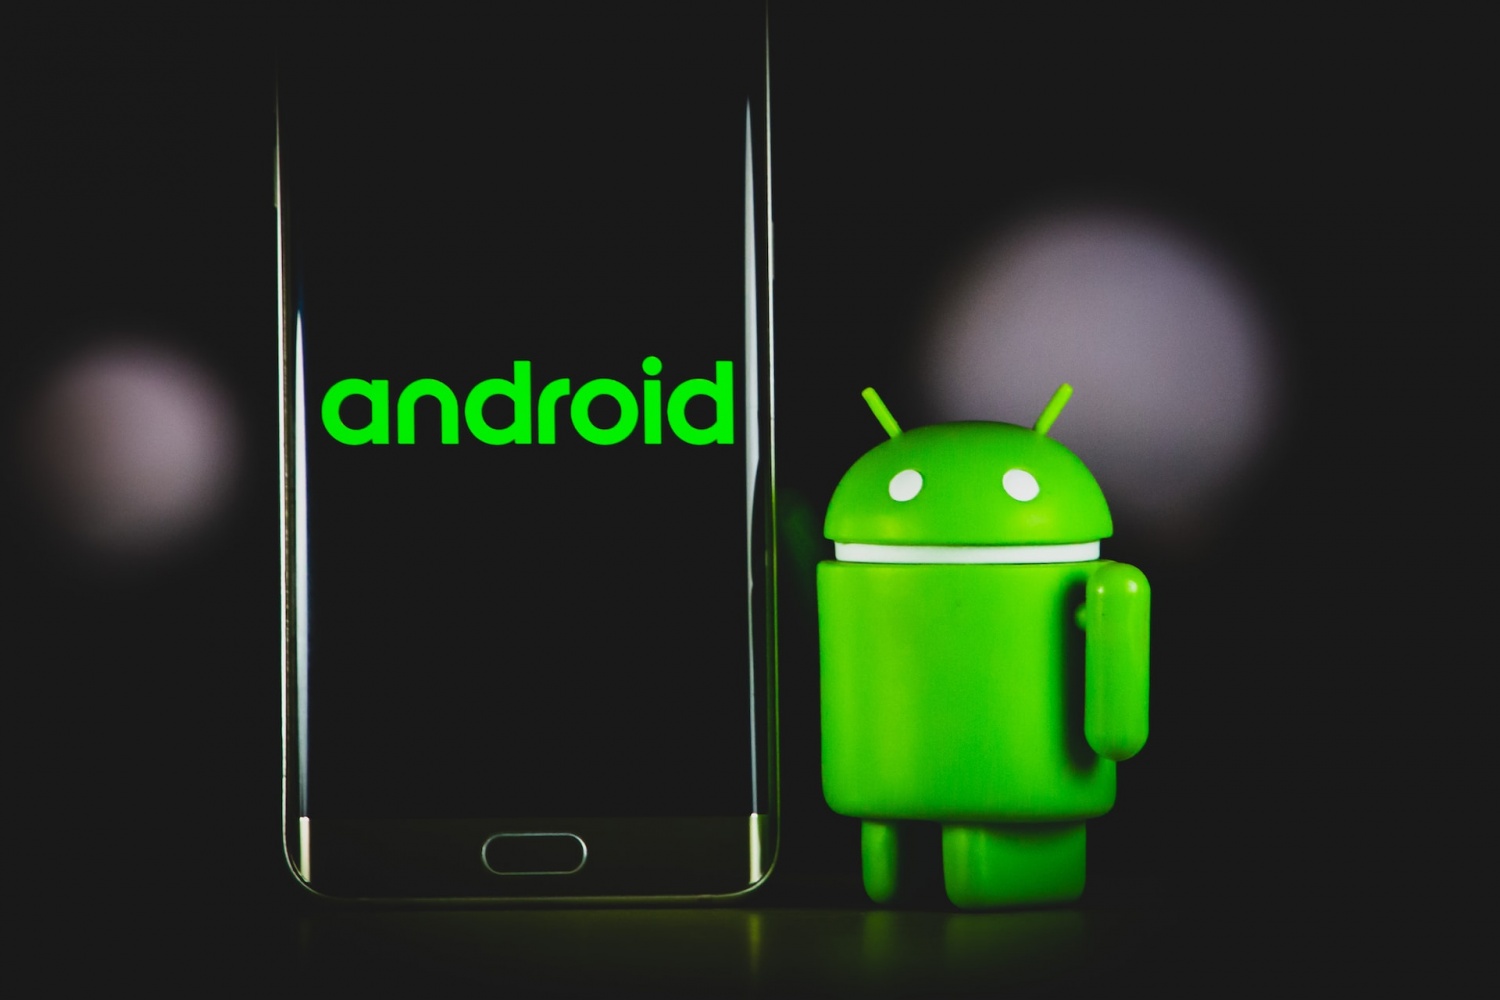 Shadow Acquires French Startup Genymobile to Bring Next-Gen Emulation Service on Android